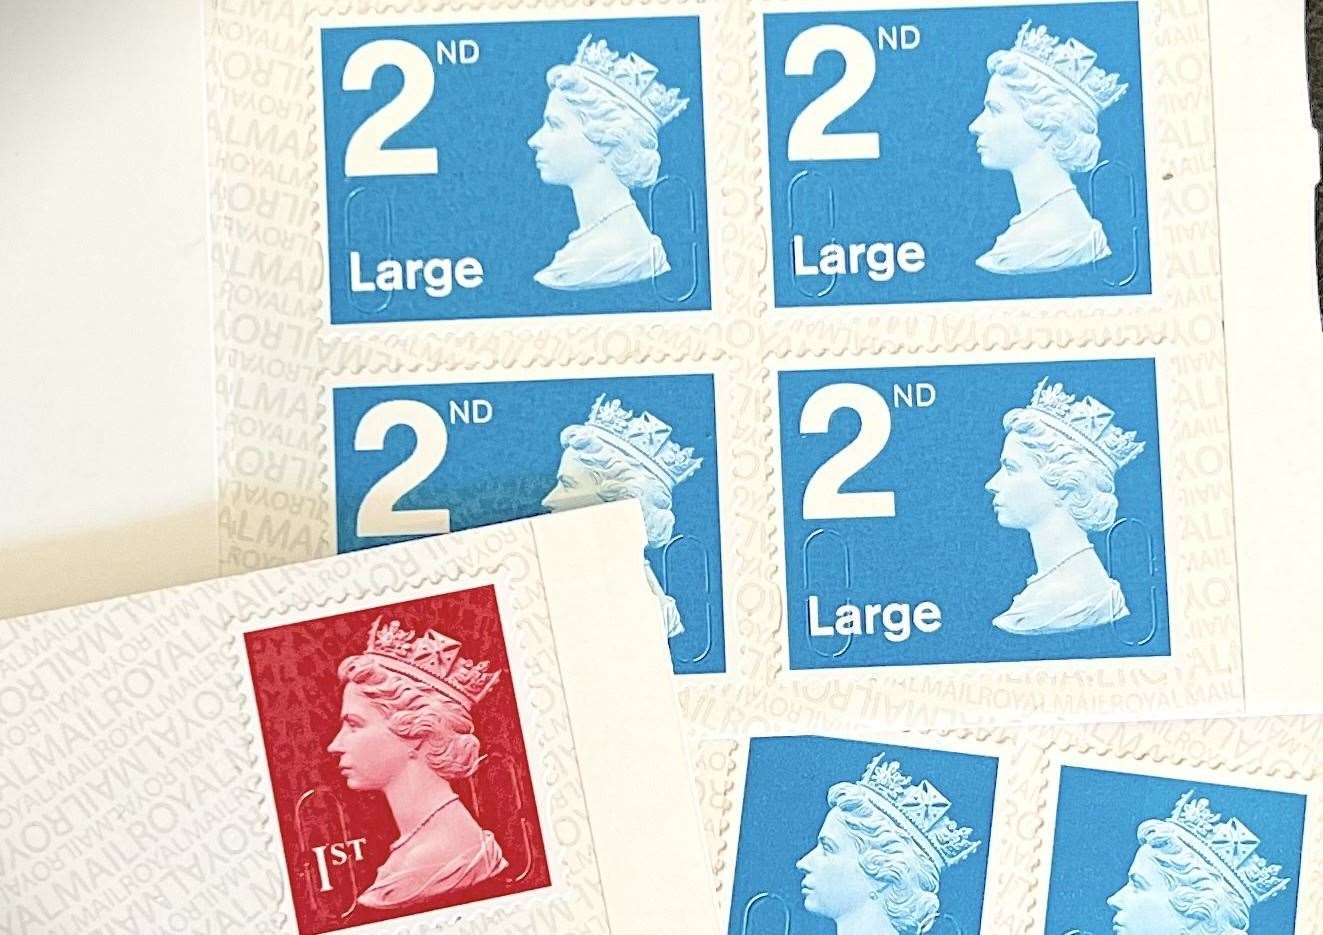 Royal Mail is now phasing out the old-look stamps without a barcode